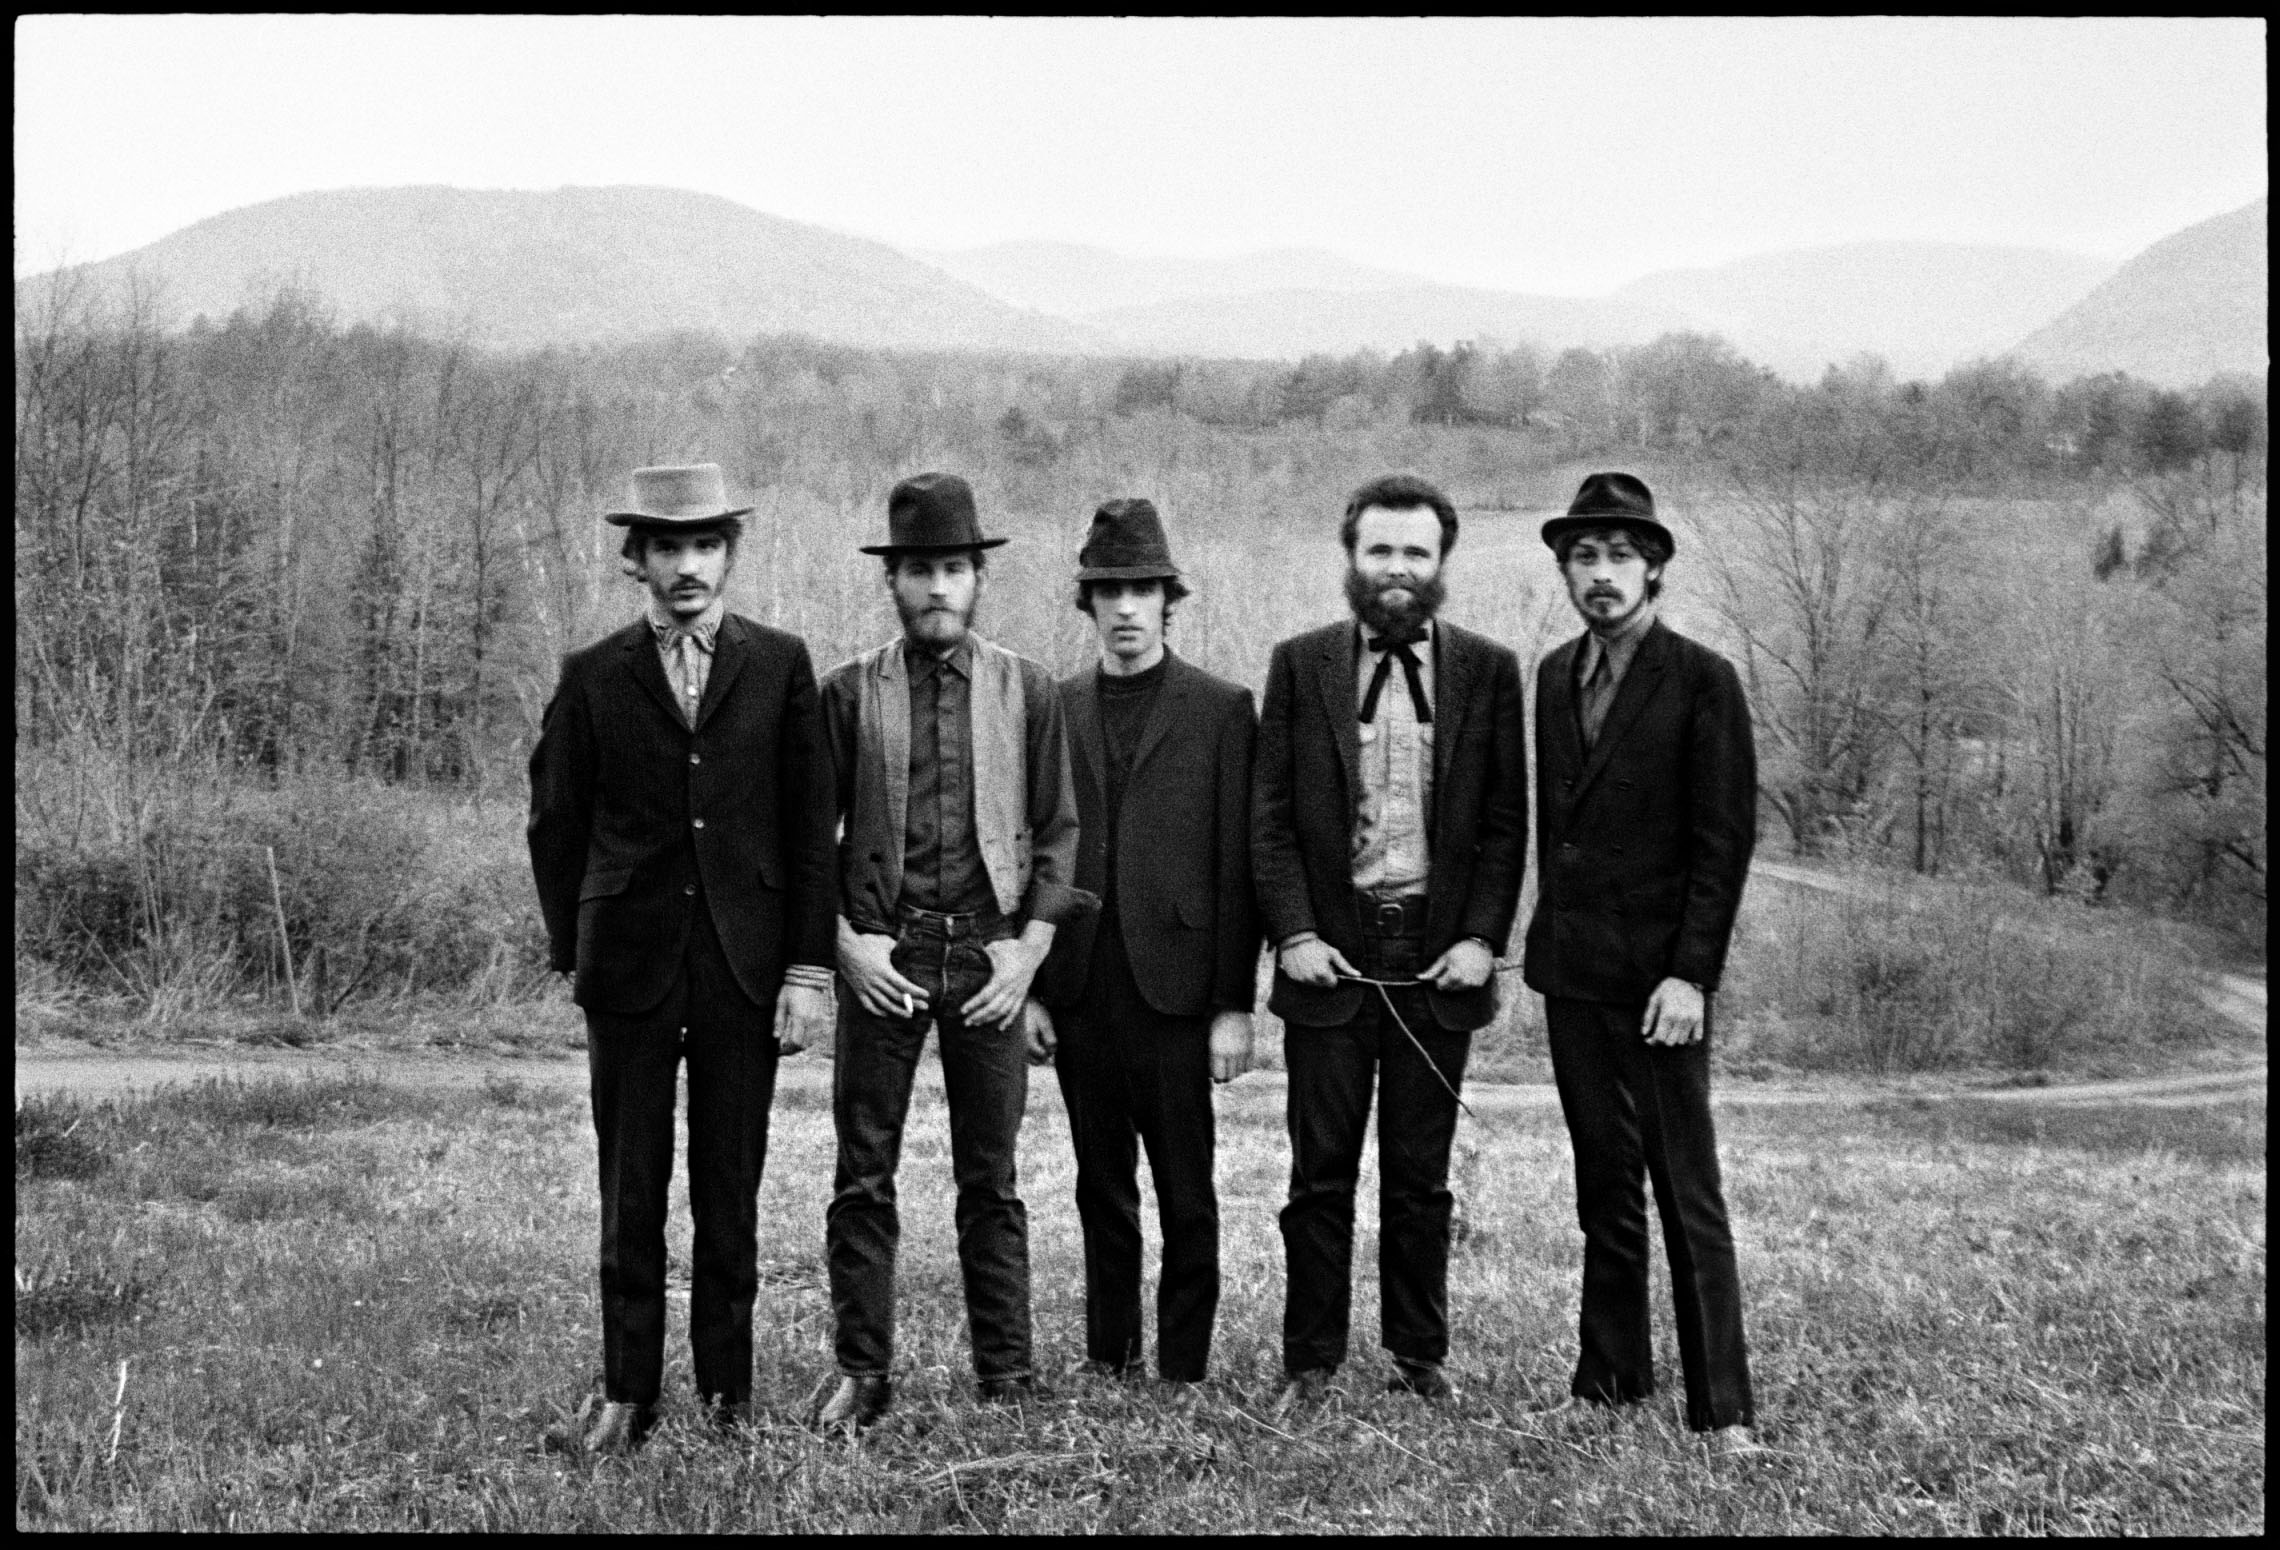 ONCE WERE BROTHERS: ROBBIE ROBERTSON AND THE BAND